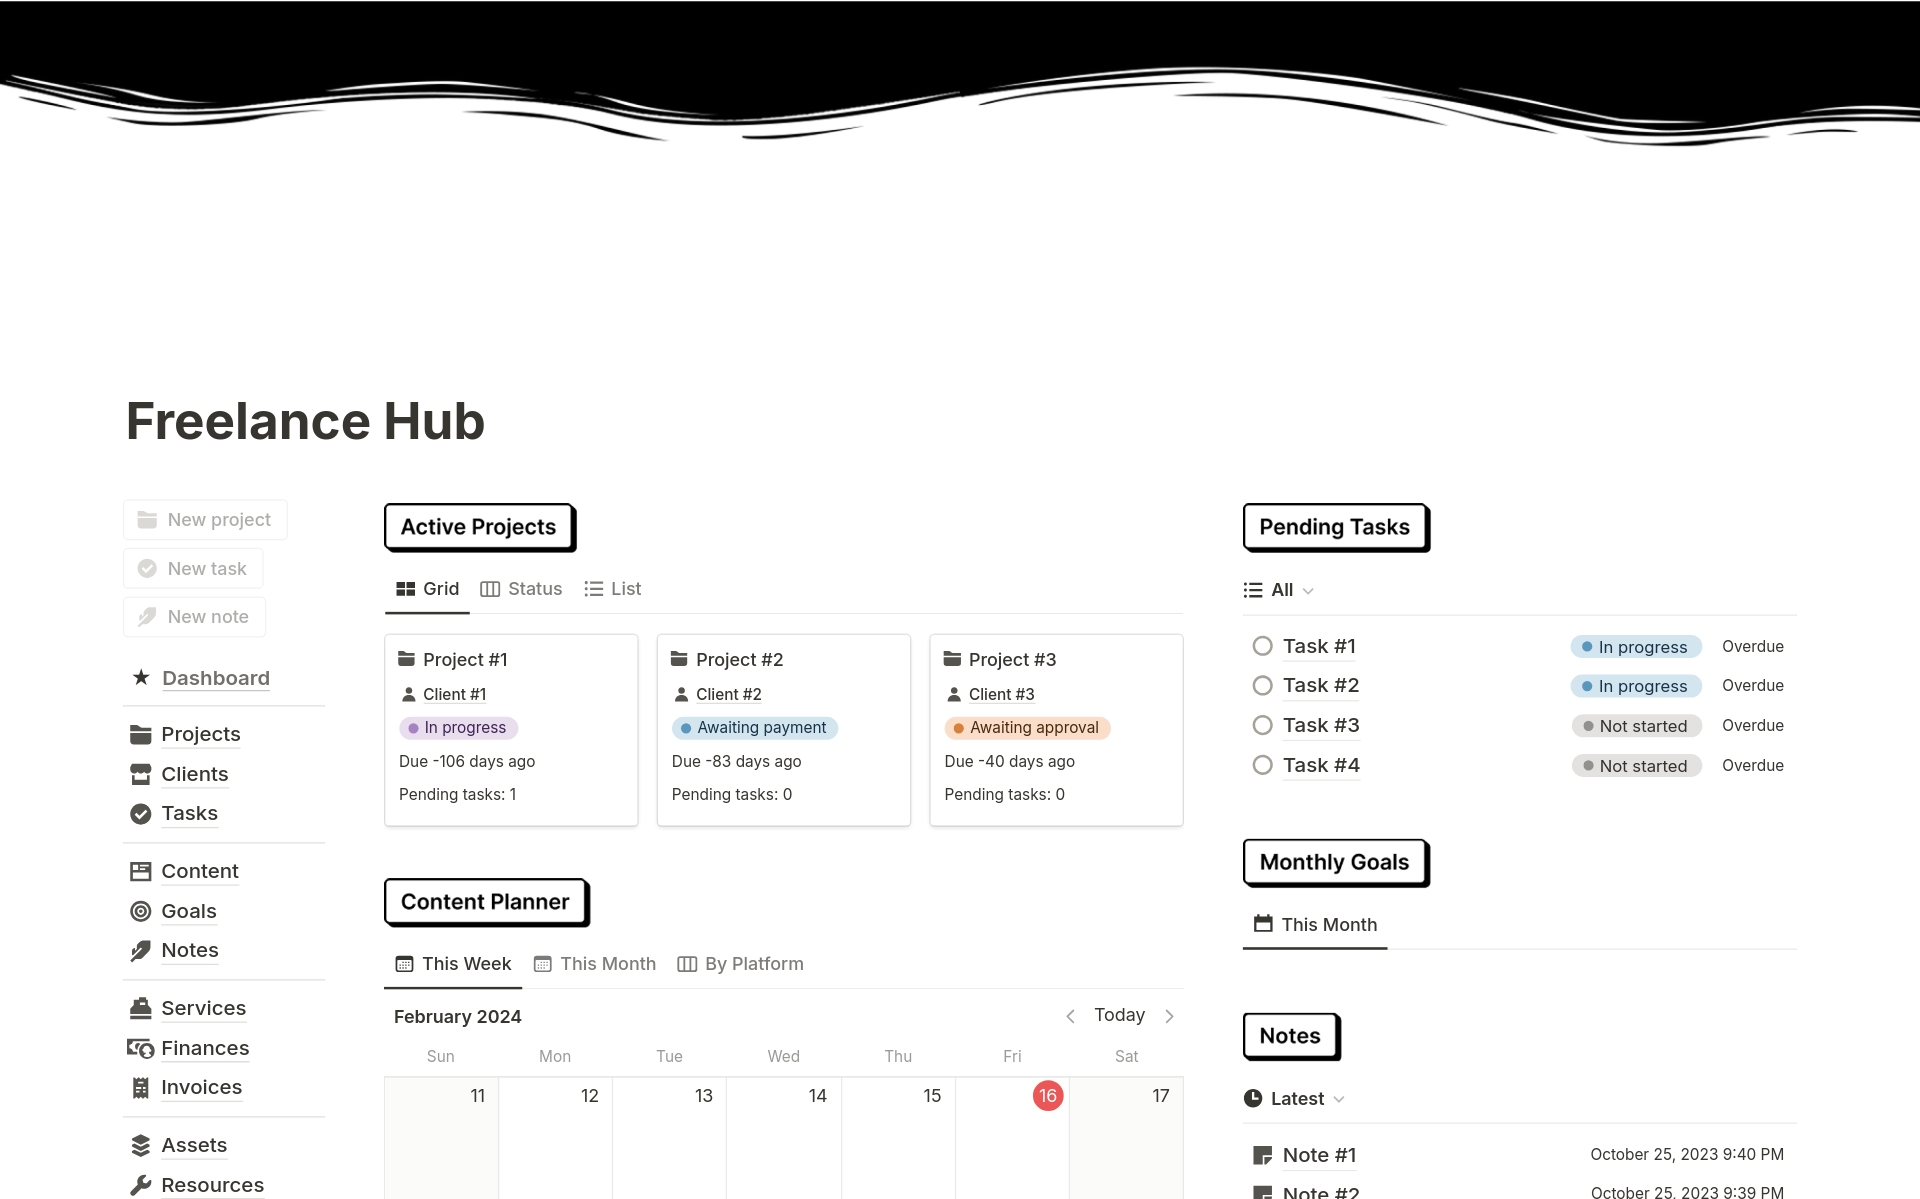 Freelance Hub is an all-in-one business management solution for freelancers.